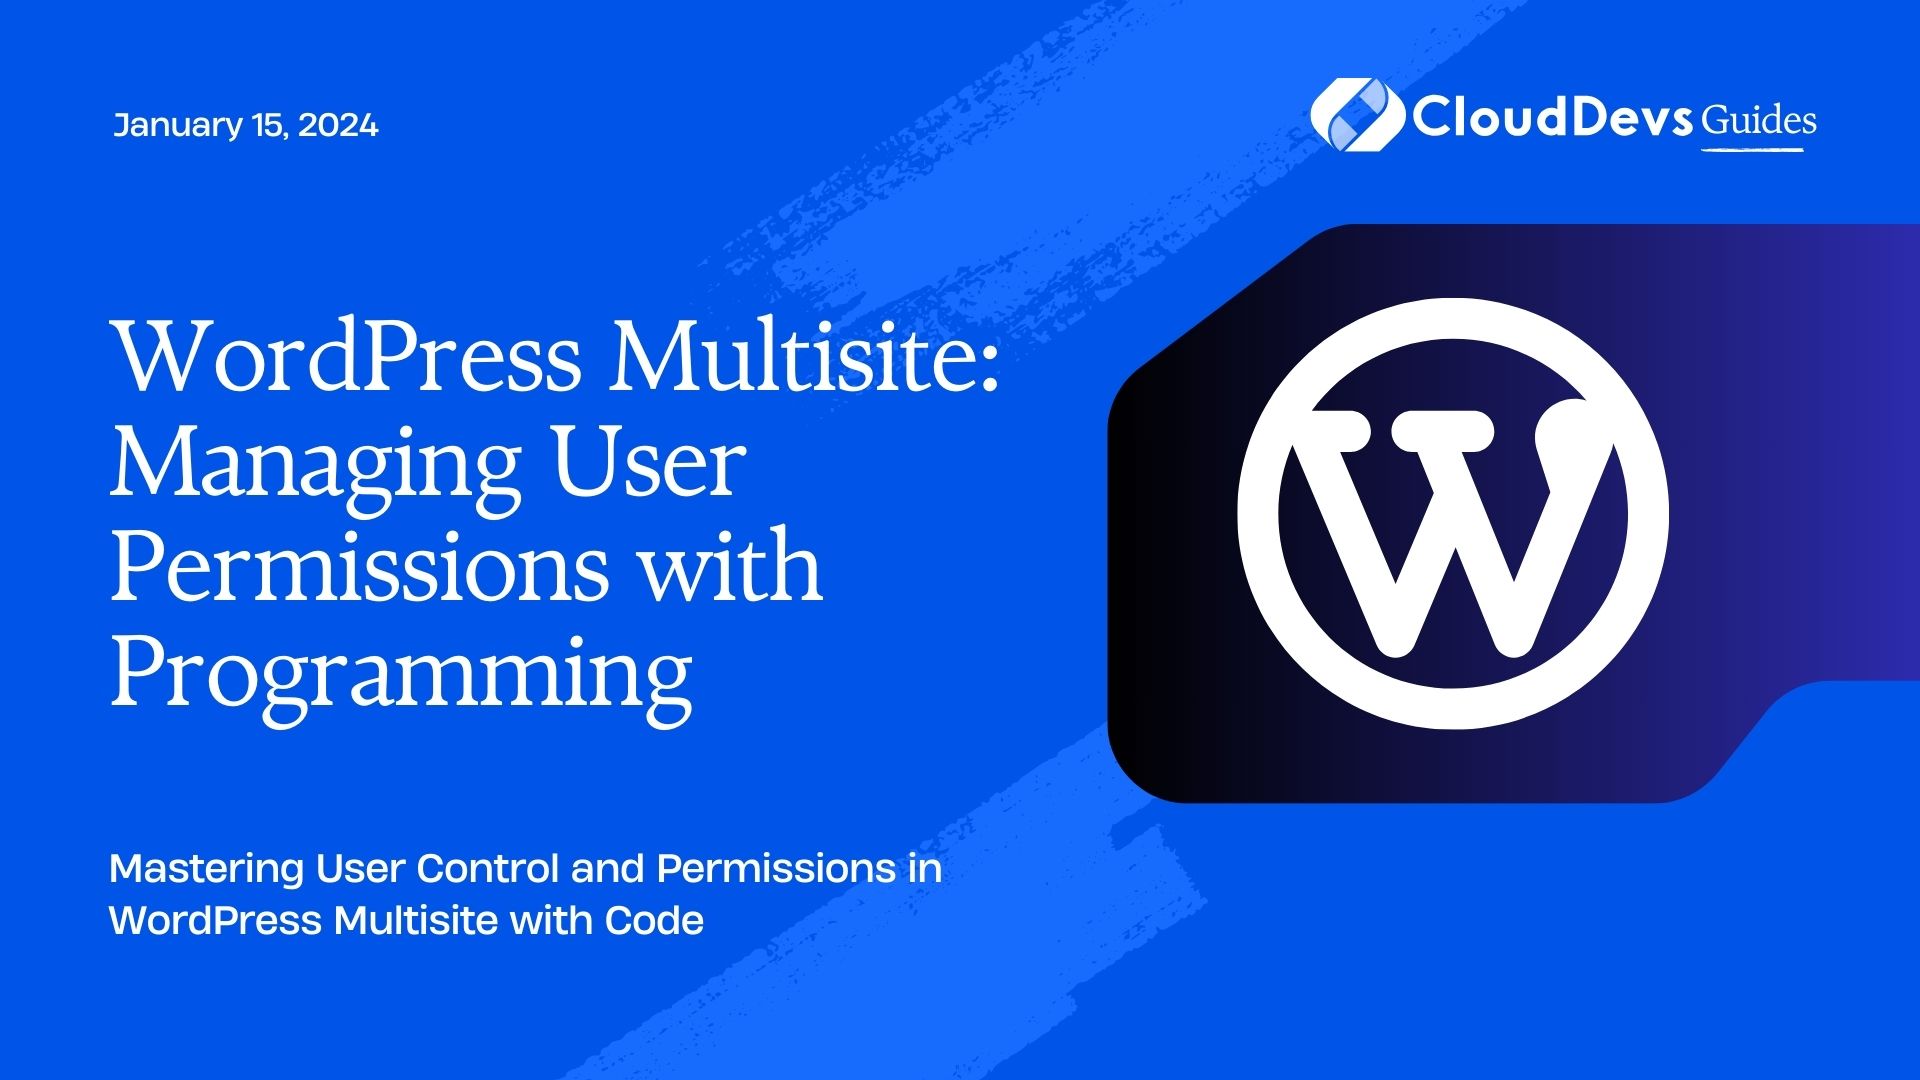 WordPress Multisite: Managing User Permissions with Programming